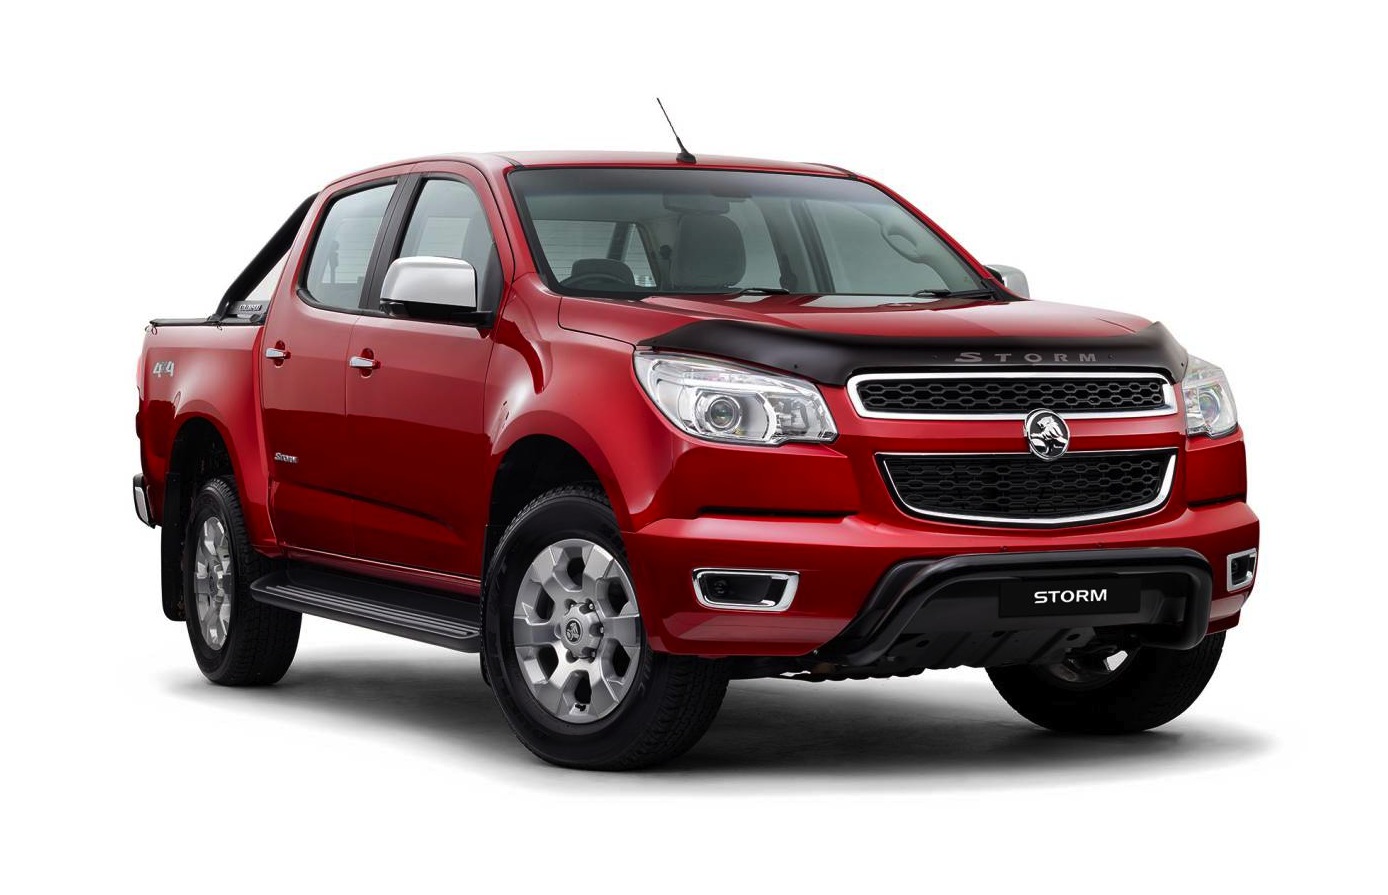 2015 Holden Colorado ‘Storm’ special is back, from $51,490